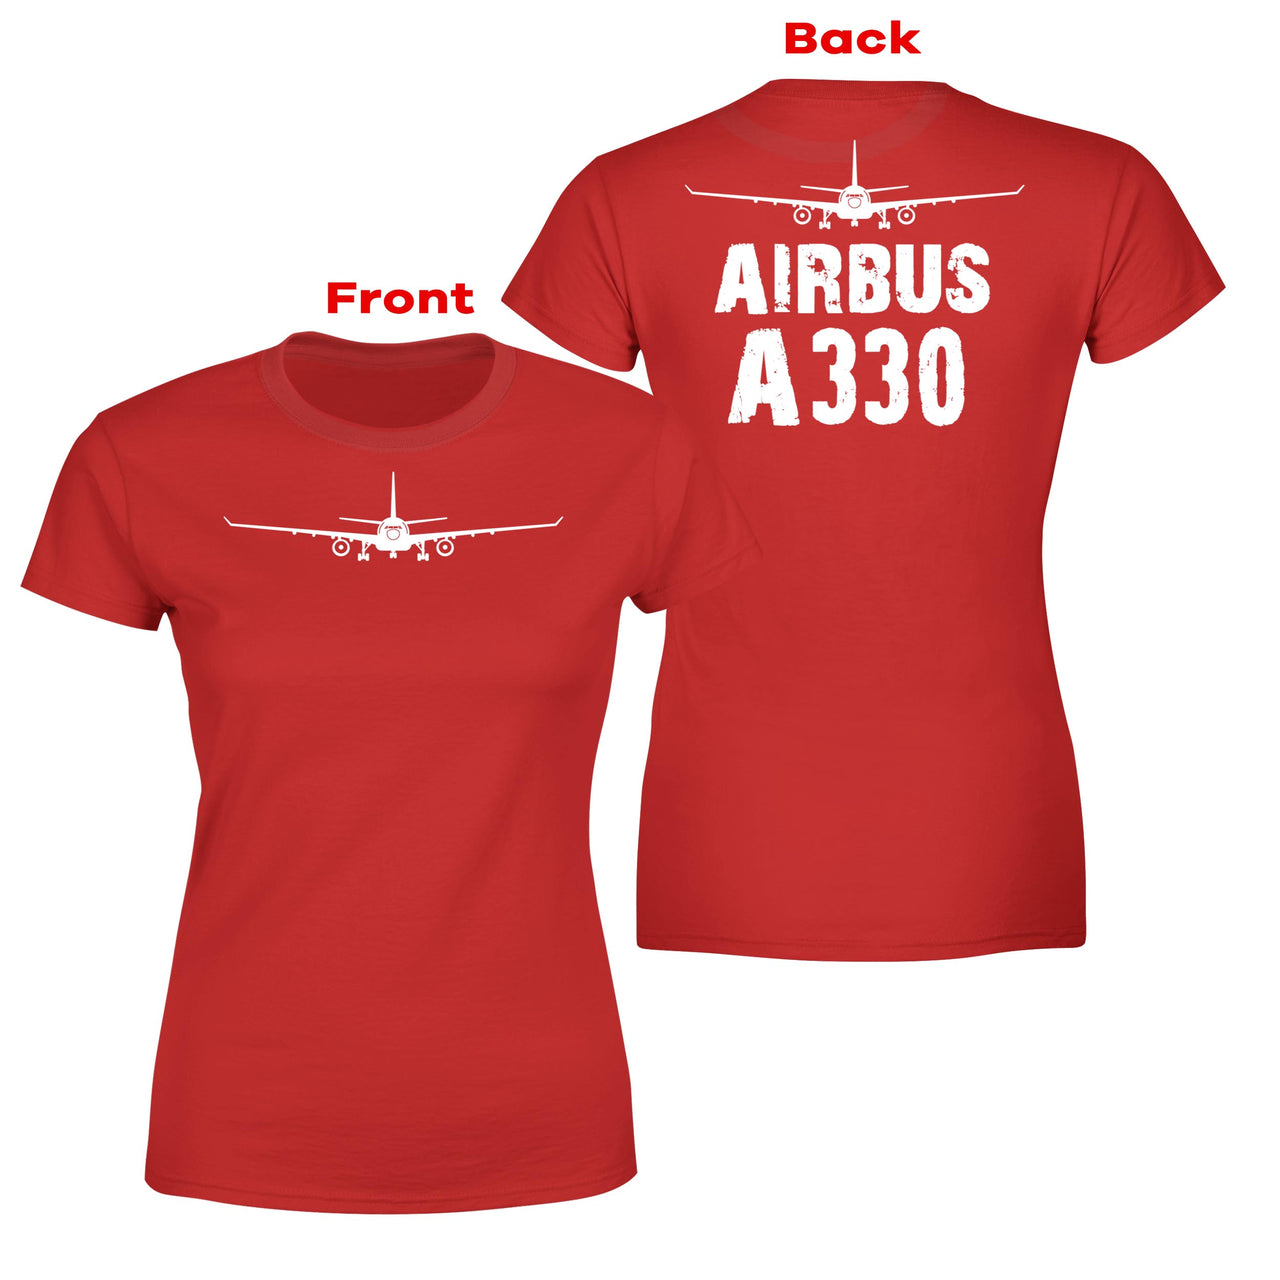 Airbus A330 & Plane Designed Double-Side T-Shirts